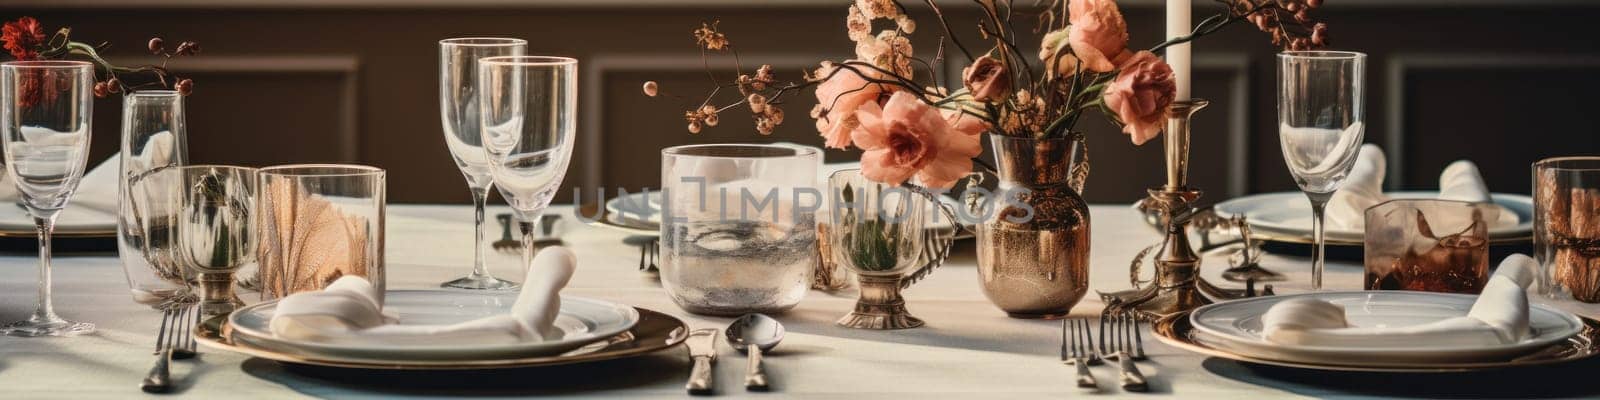 A table set for a formal dinner with silverware and flowers, AI by starush